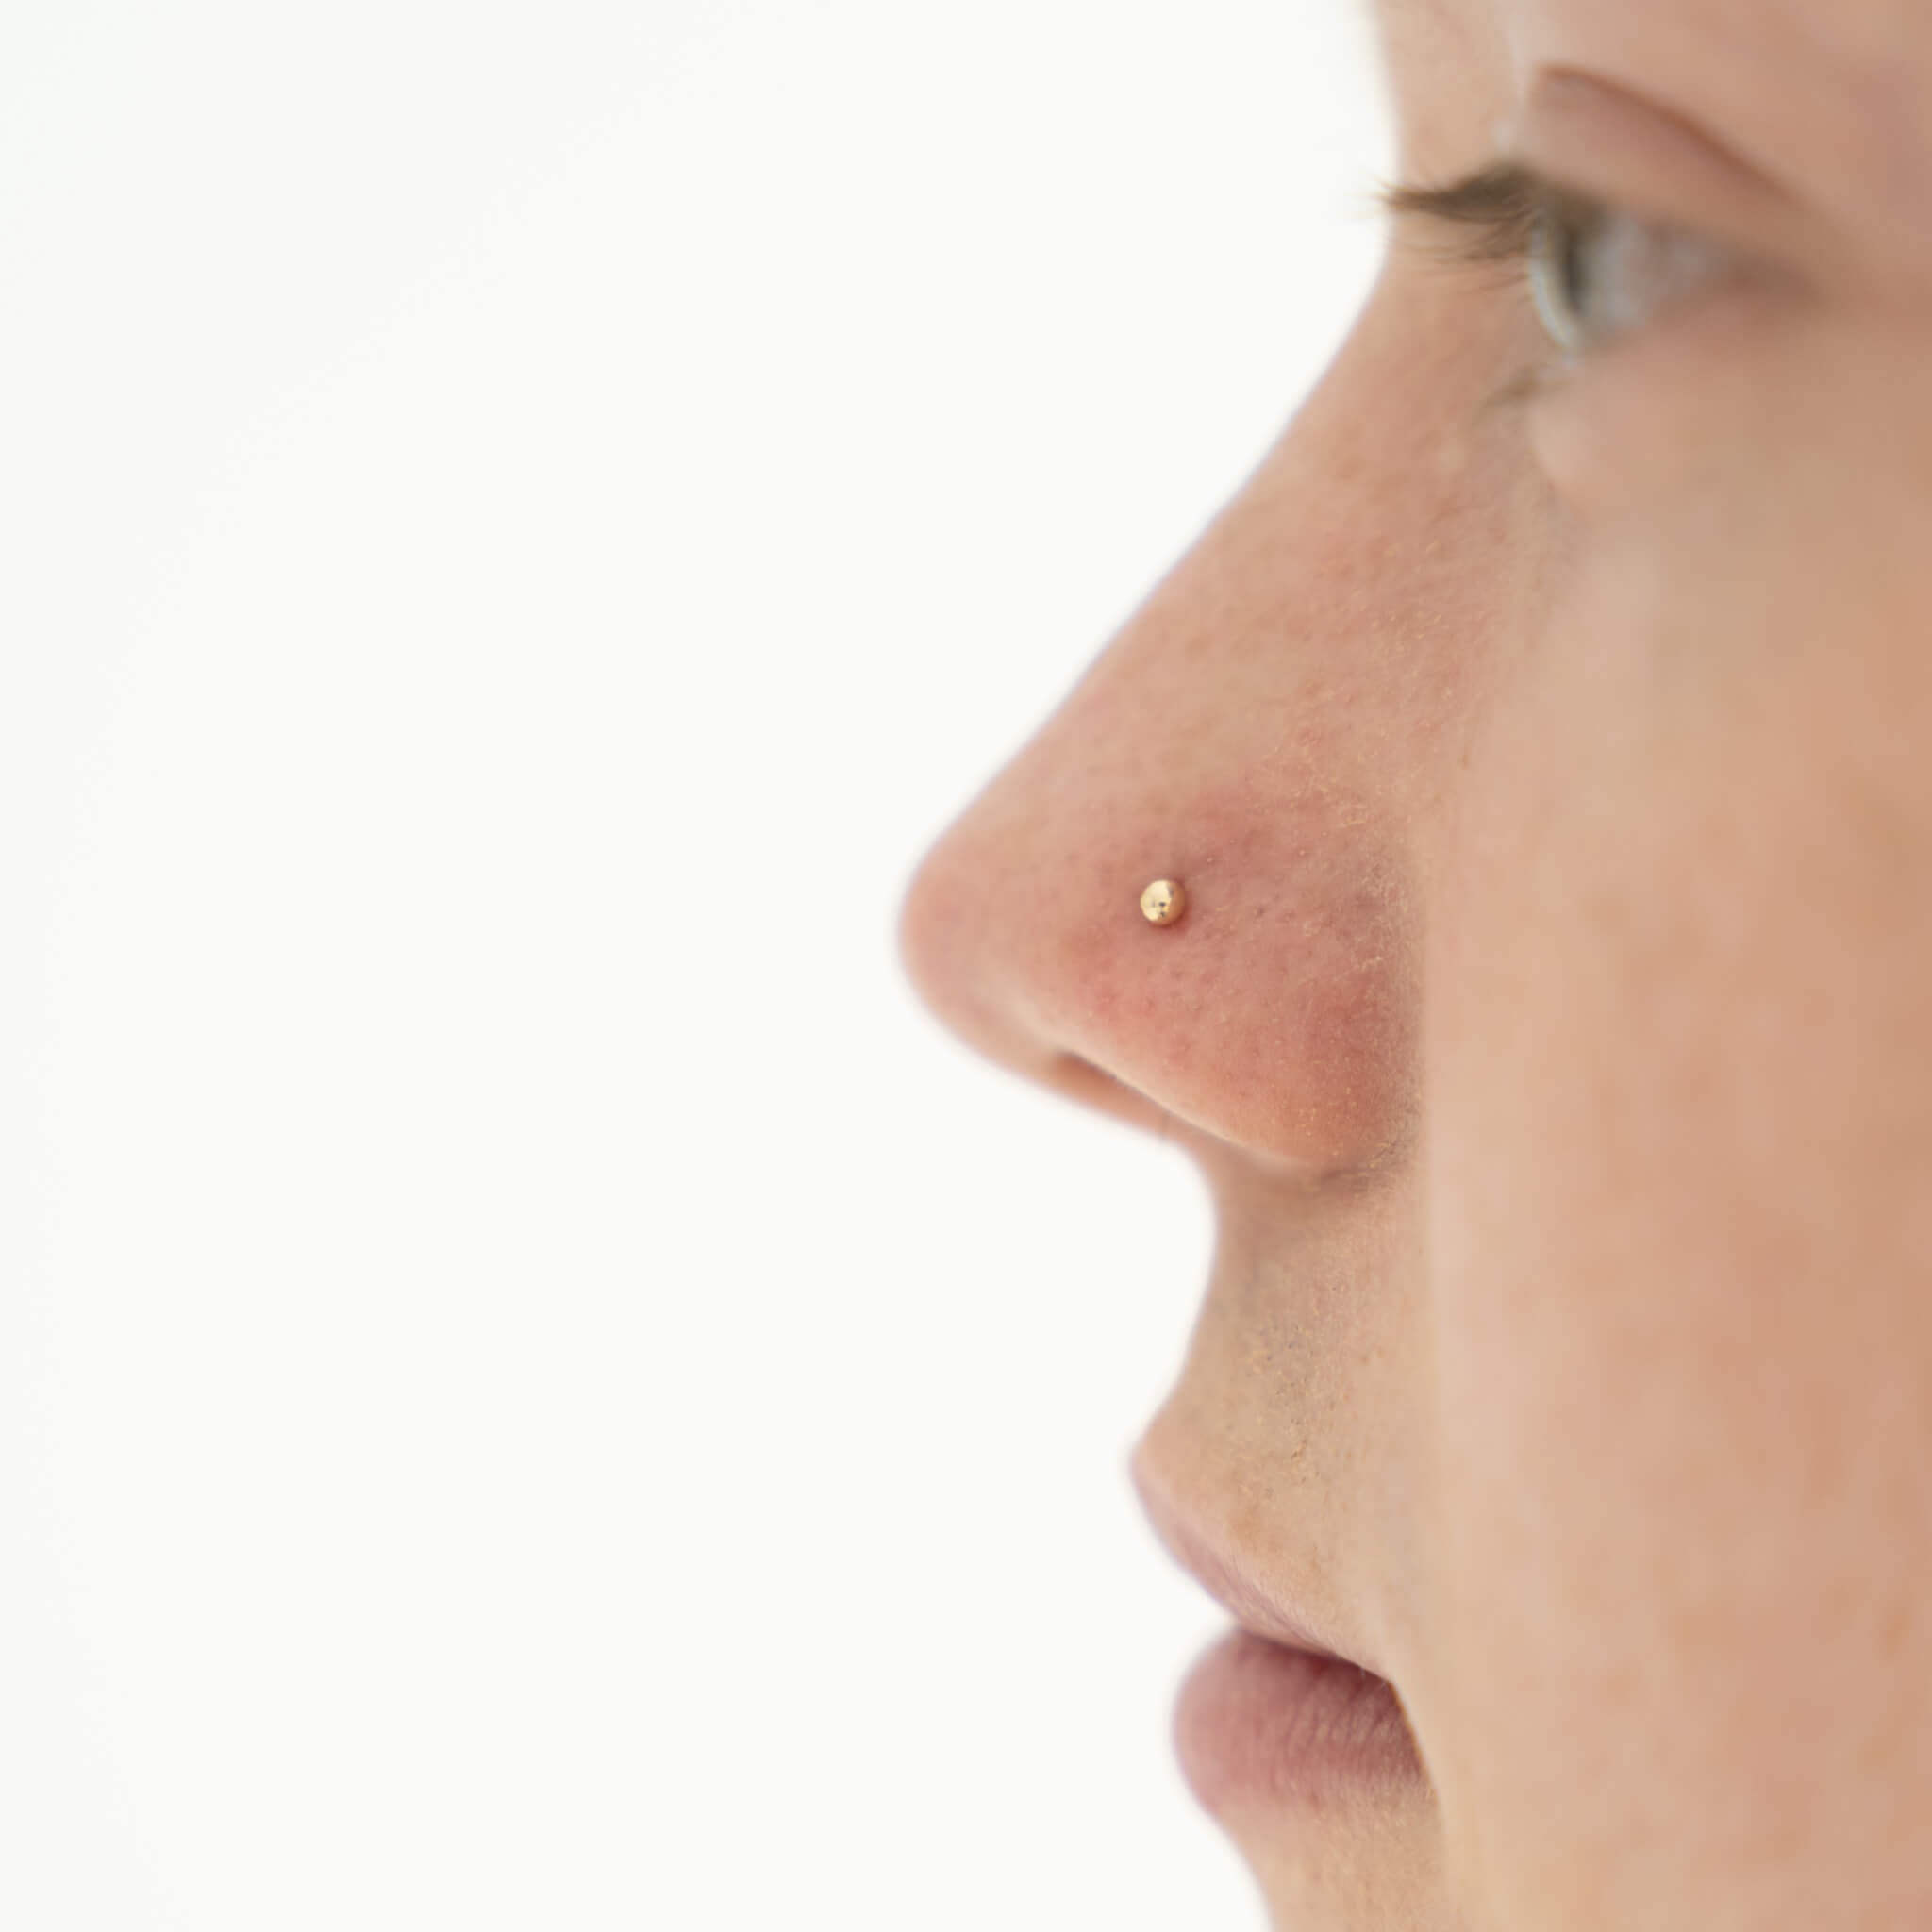 How To Find The Perfect Jewelry To Fit Your Nose Piercing